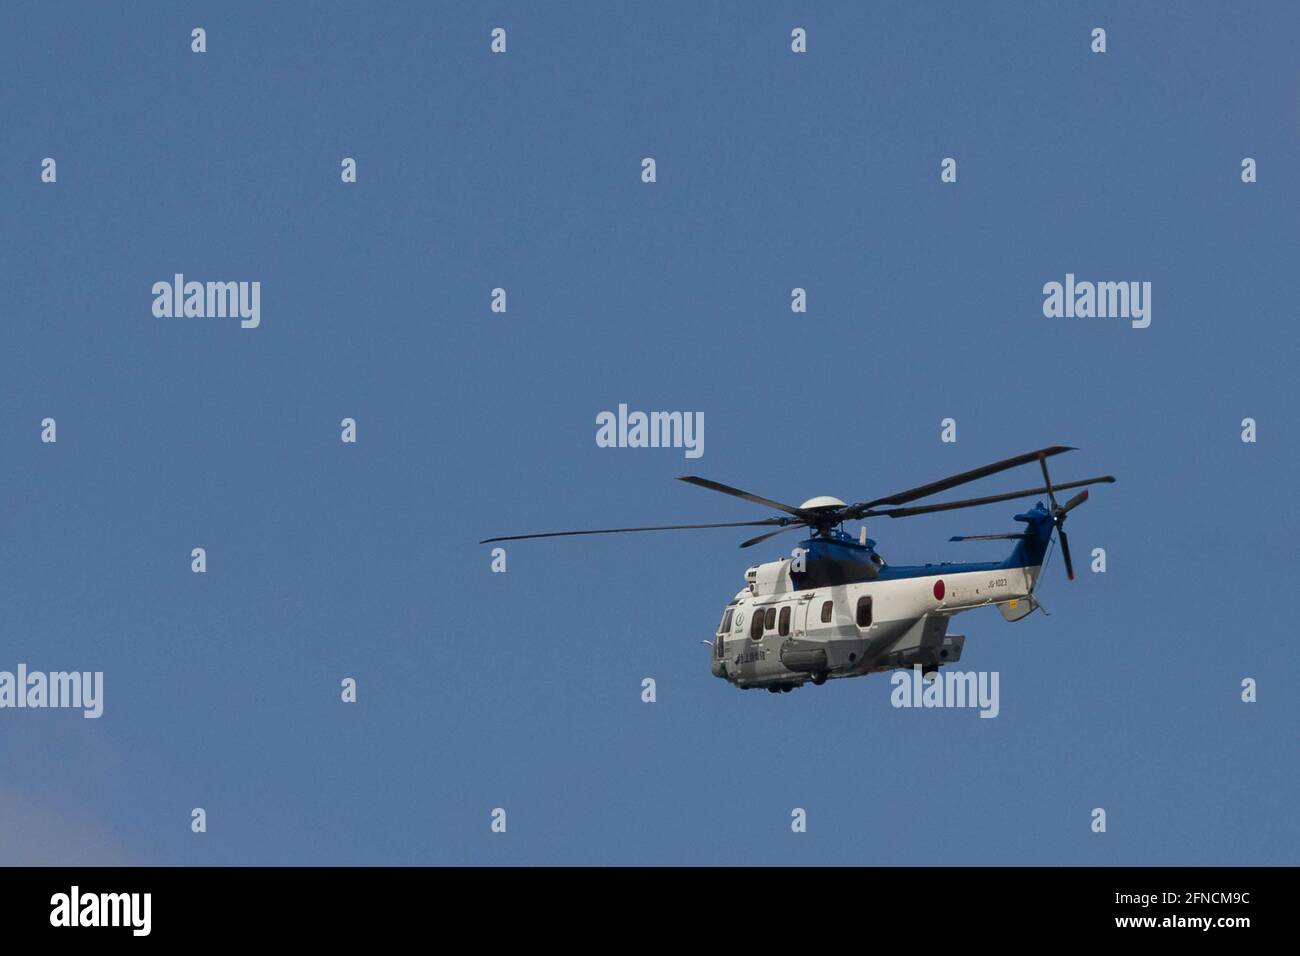 An Airbus Helicopter H225M 'Super Puma' operated by ATLA (Acquisitions, Technology and Logistics Agency) which is part of the Japanese Ministry of Defense flies near Naval Air Facility in Kanagawa. Stock Photo